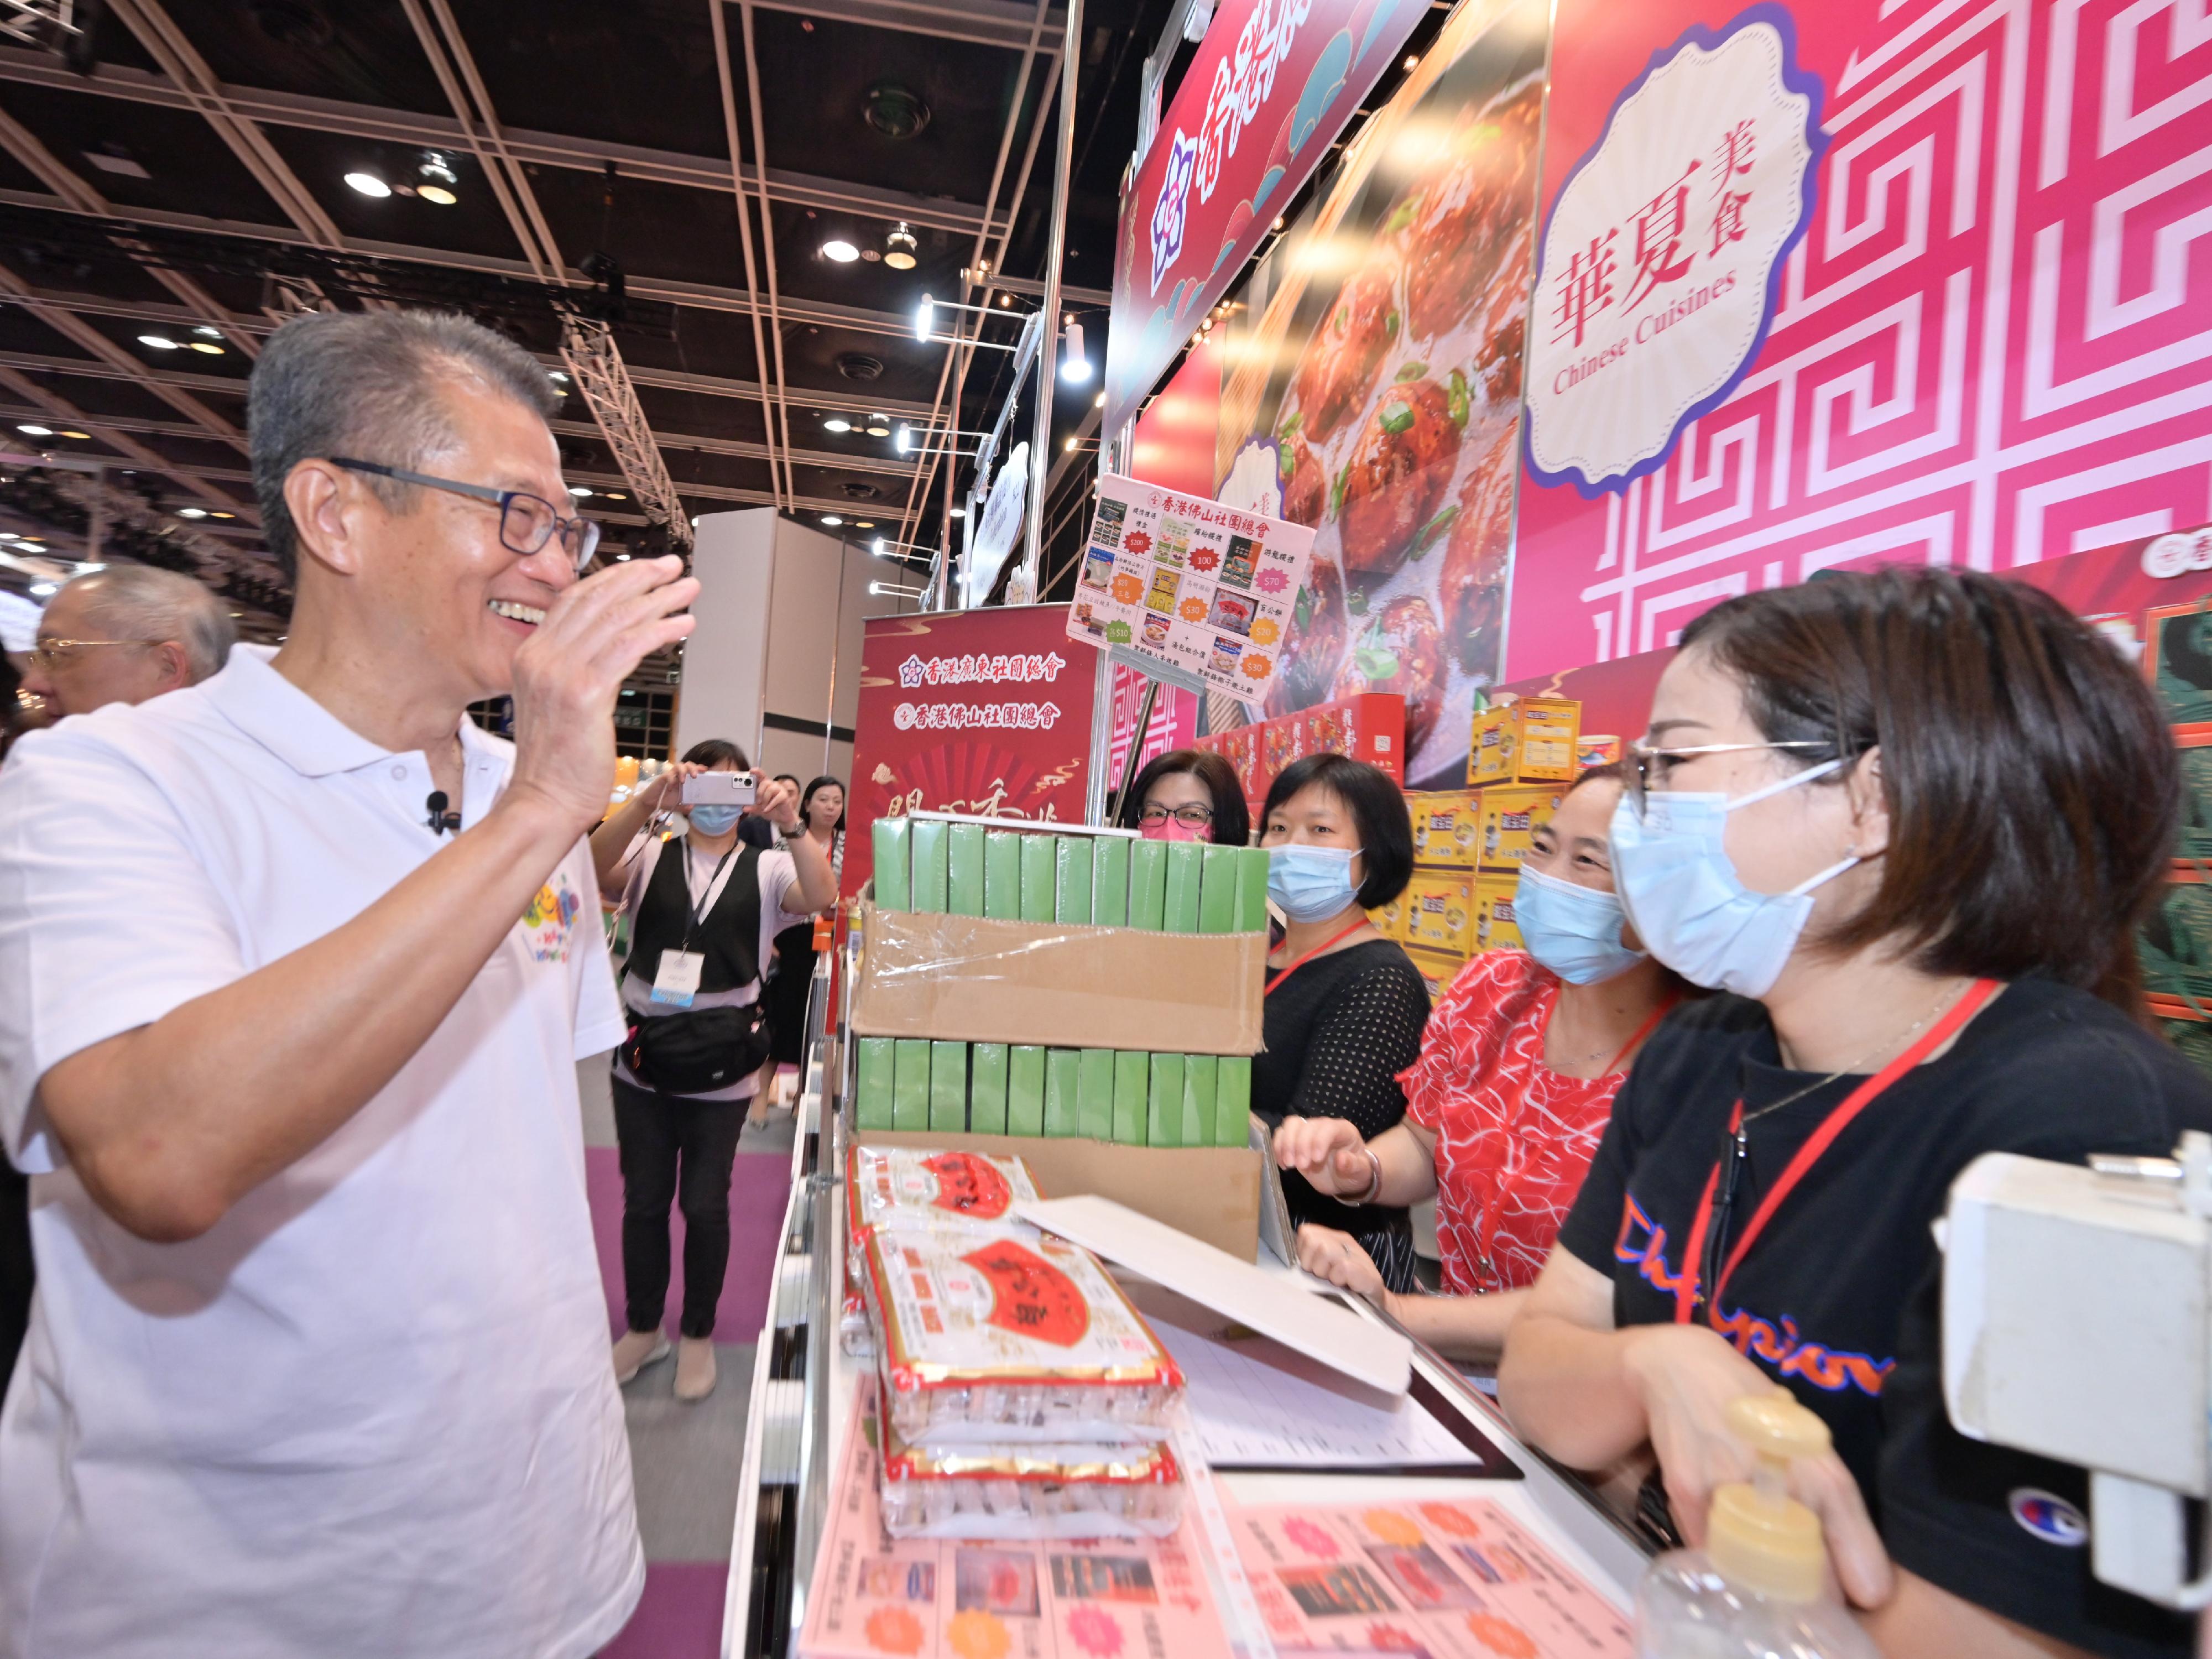 The Financial Secretary, Mr Paul Chan, officiated at the opening ceremony of the first "Happy Hong Kong" Gourmet Marketplace today (April 29). Photo shows Mr Chan (left) touring the Gourmet Marketplace.